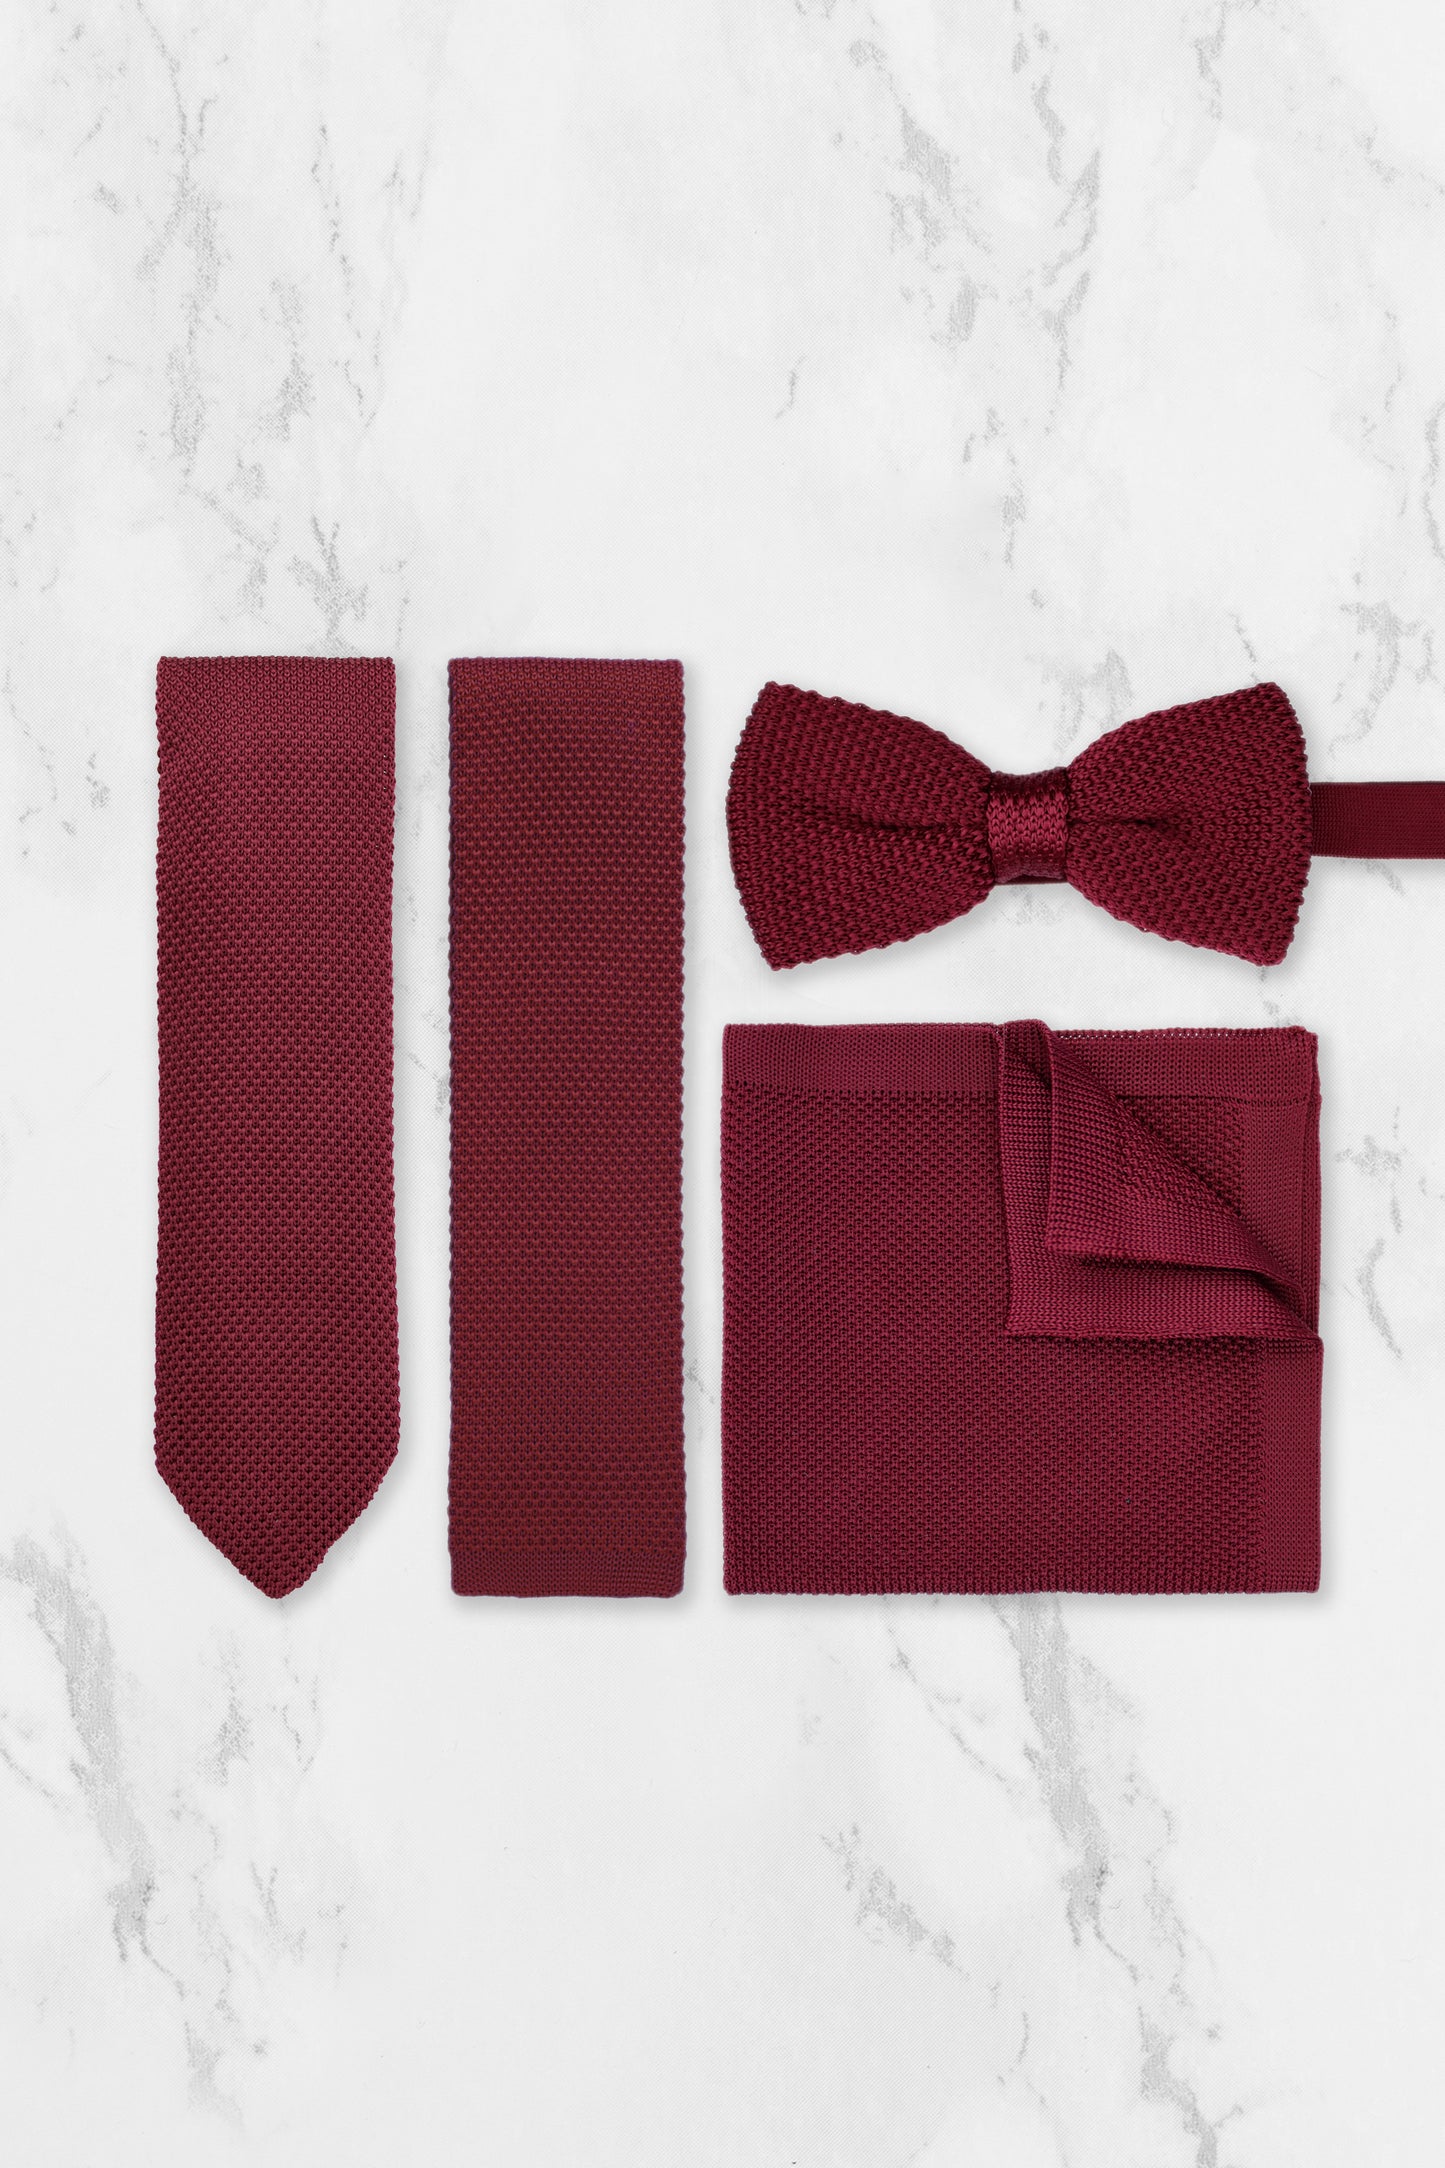 100% Polyester Knitted Bow Tie - Burgundy Red